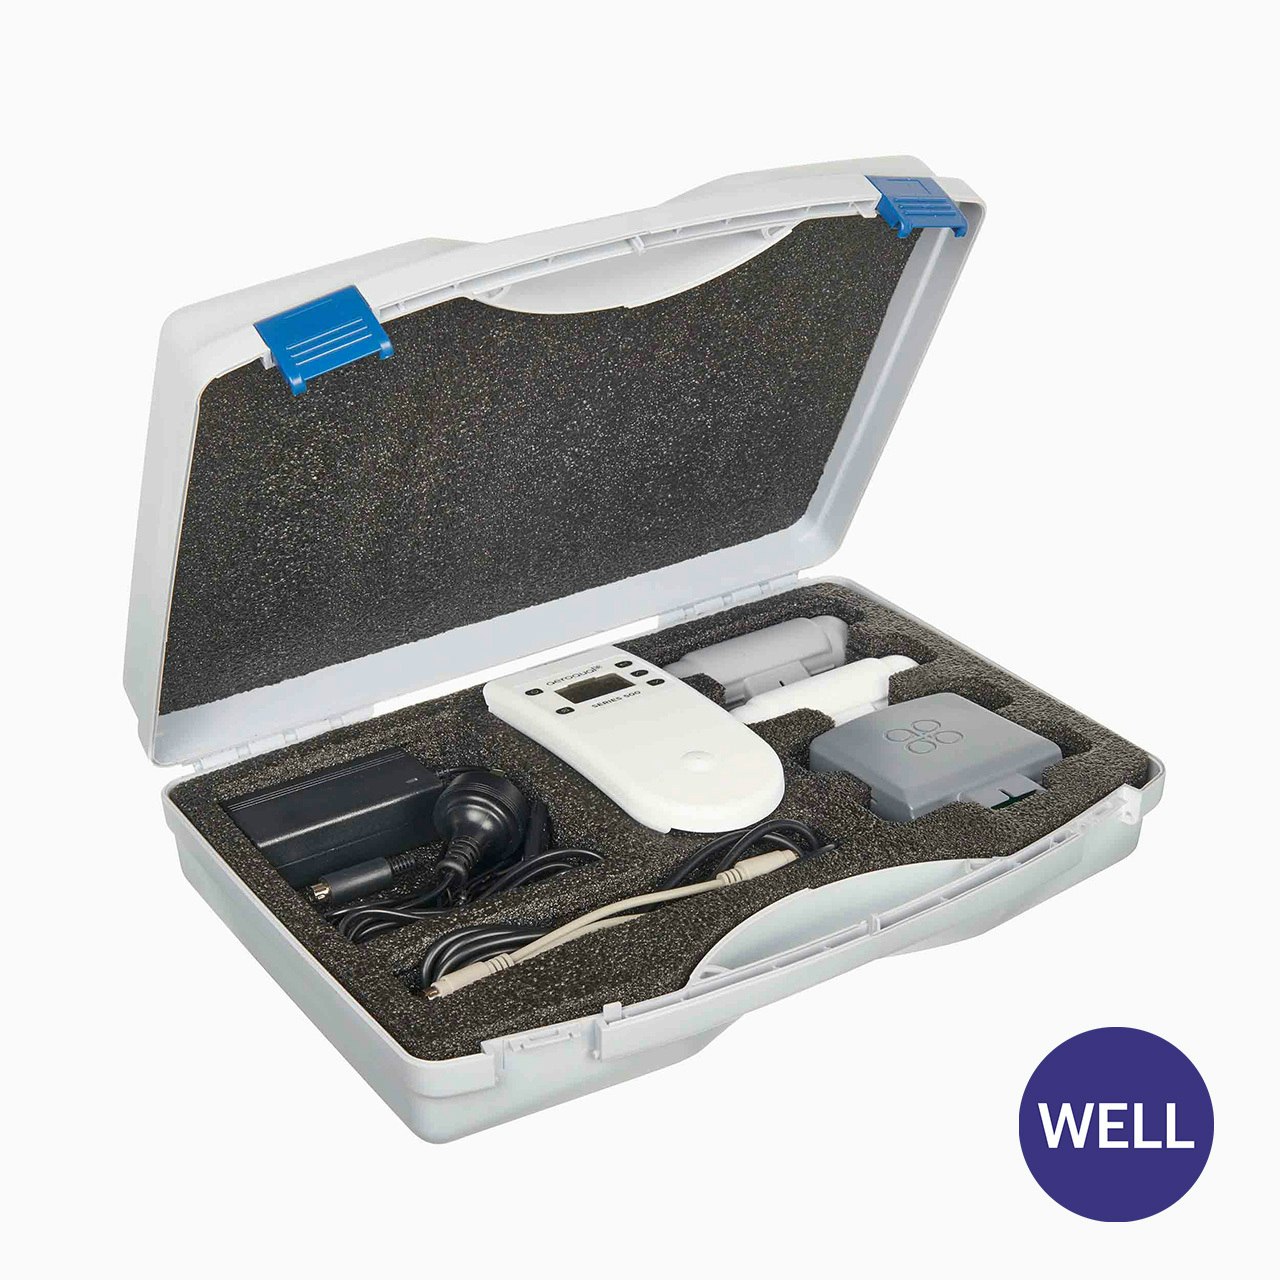 Indoor Air Quality Test Kit for WELL